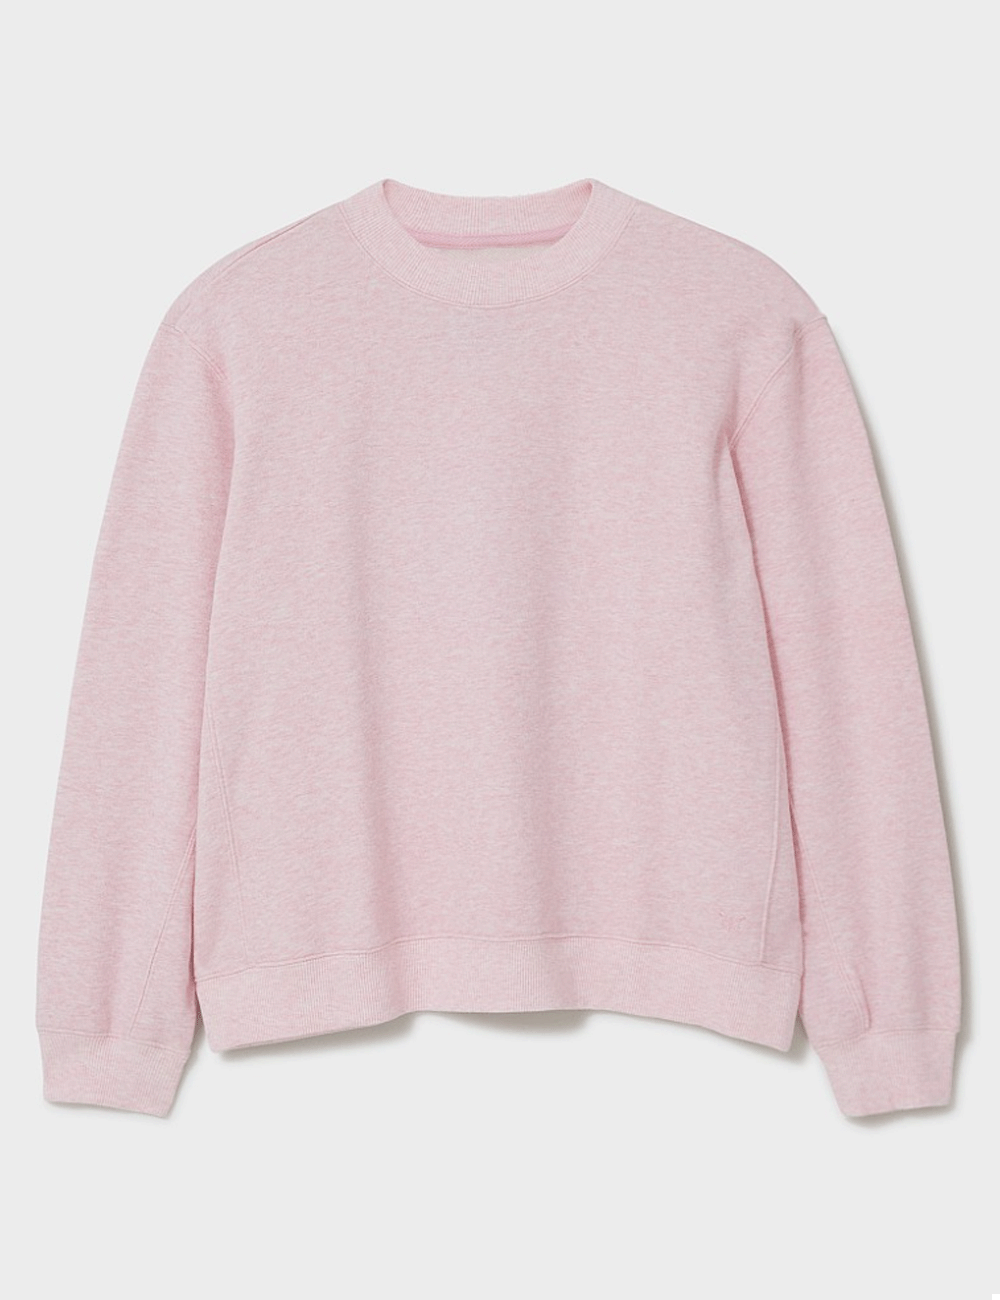 Crew Clothing's Essential Oversized Sweatshirt in Pink Marl on a grey background